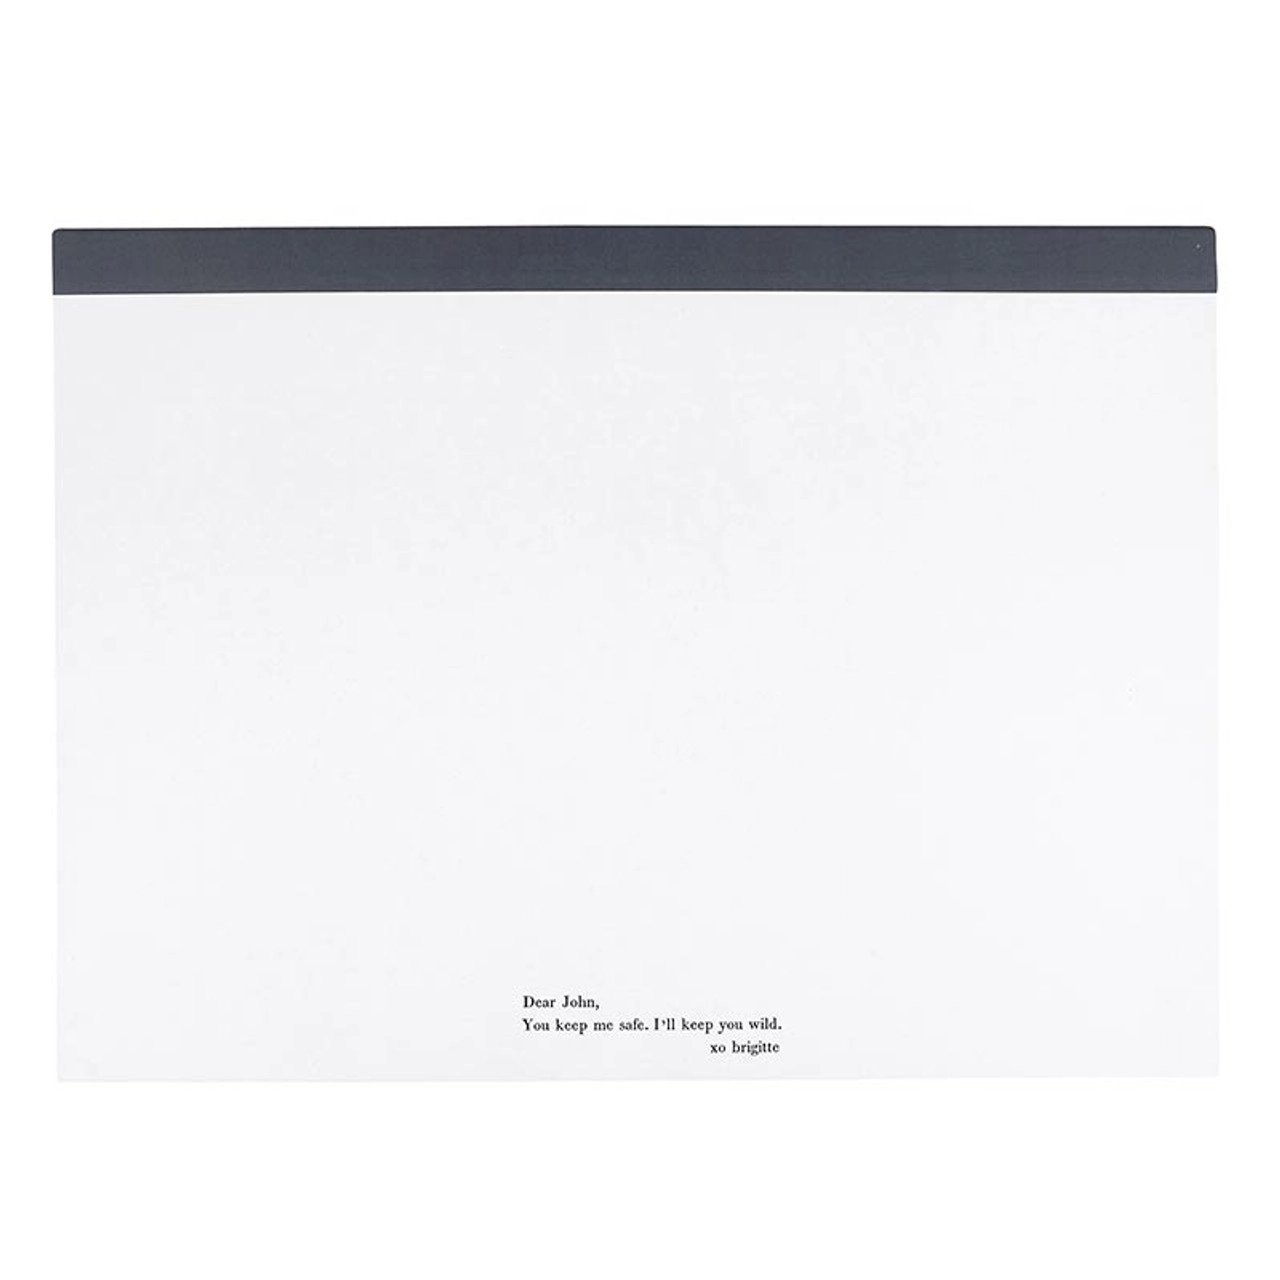 Extra Large Desktop Notepad Enjoy The Gift of An Ordinary Day | 15" x 11" Planner Desk Pad